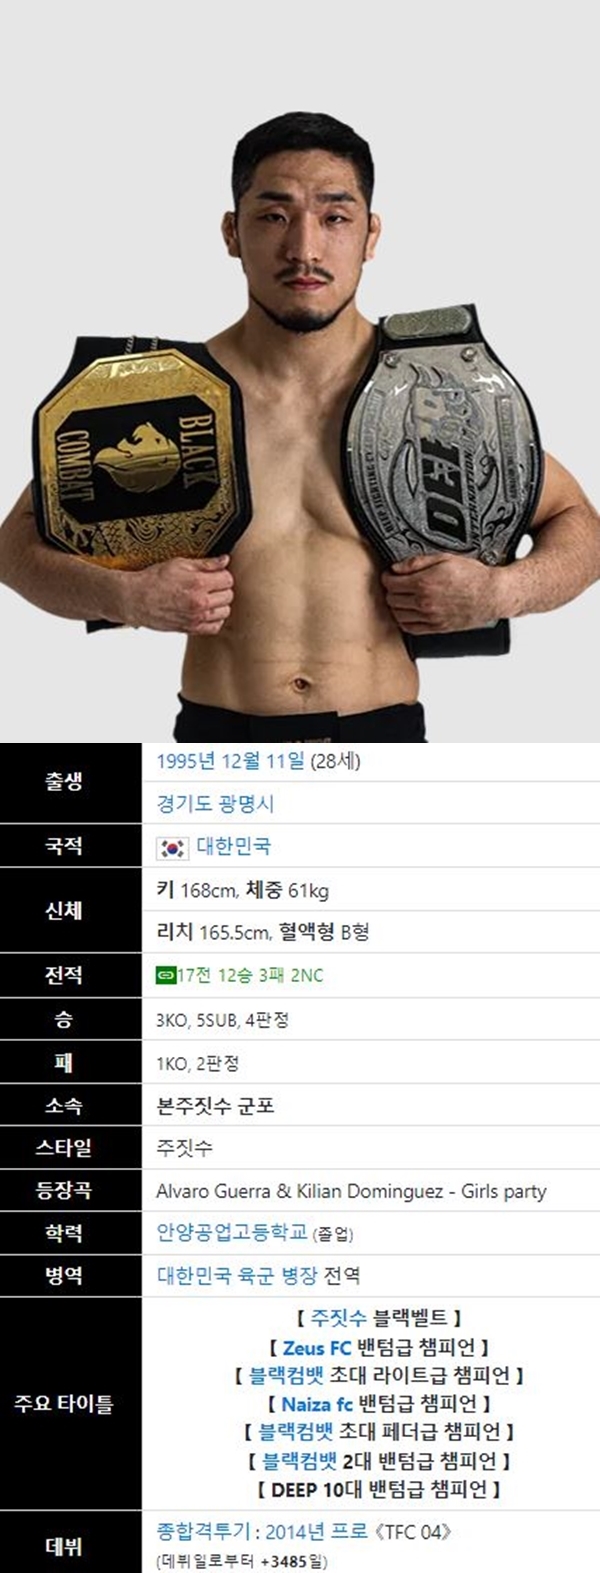 Road to ufc 유수영